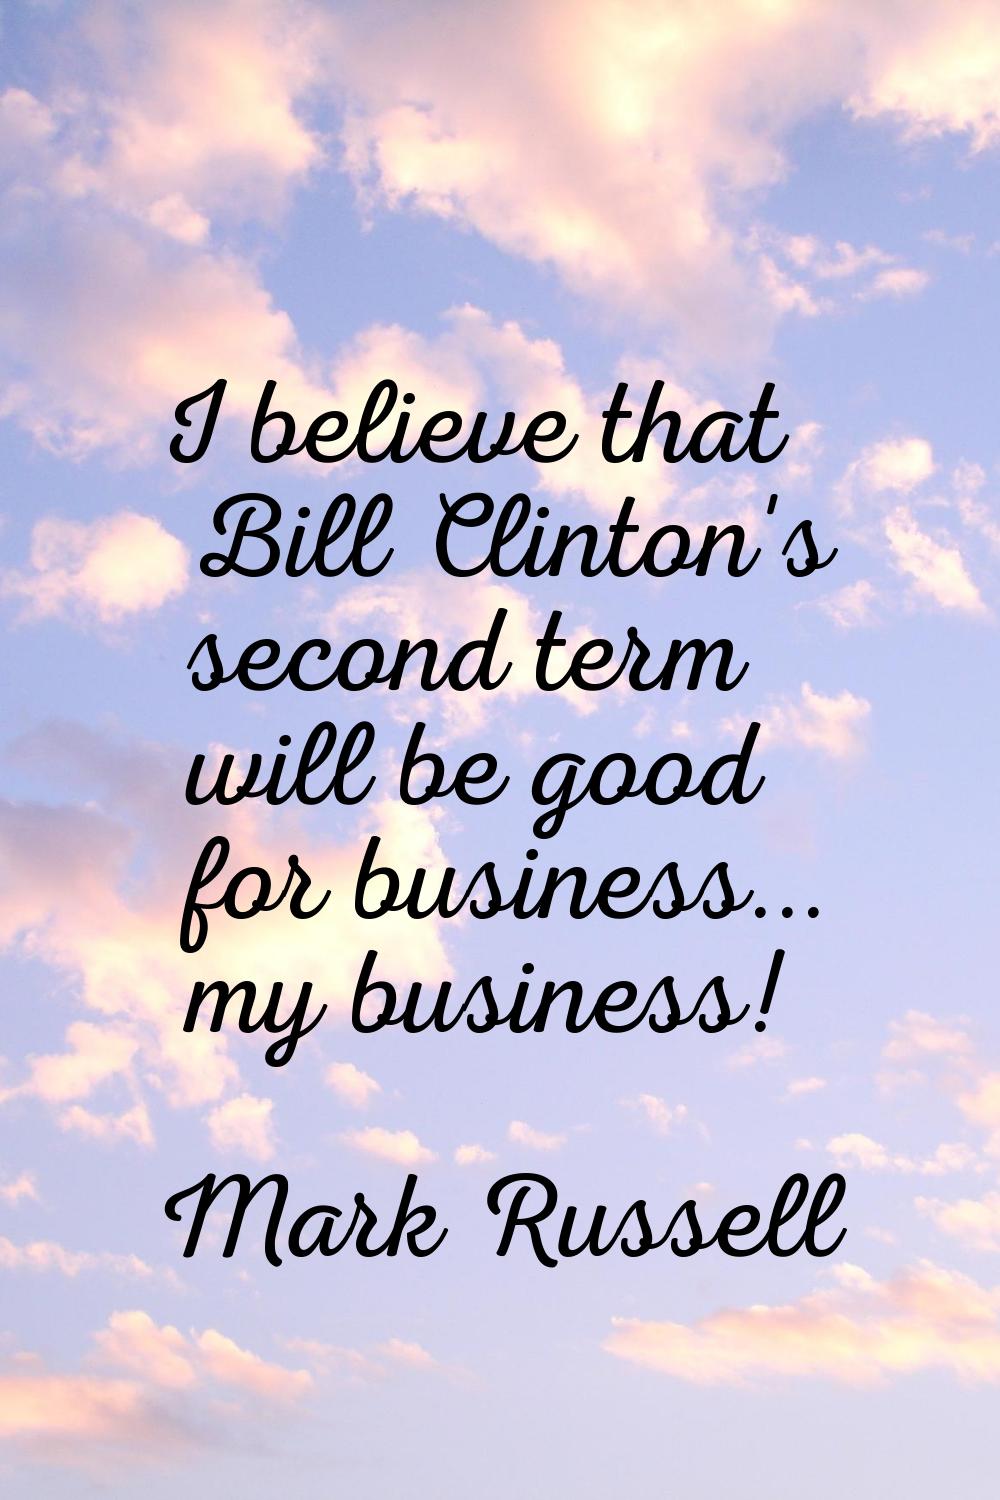 I believe that Bill Clinton's second term will be good for business... my business!